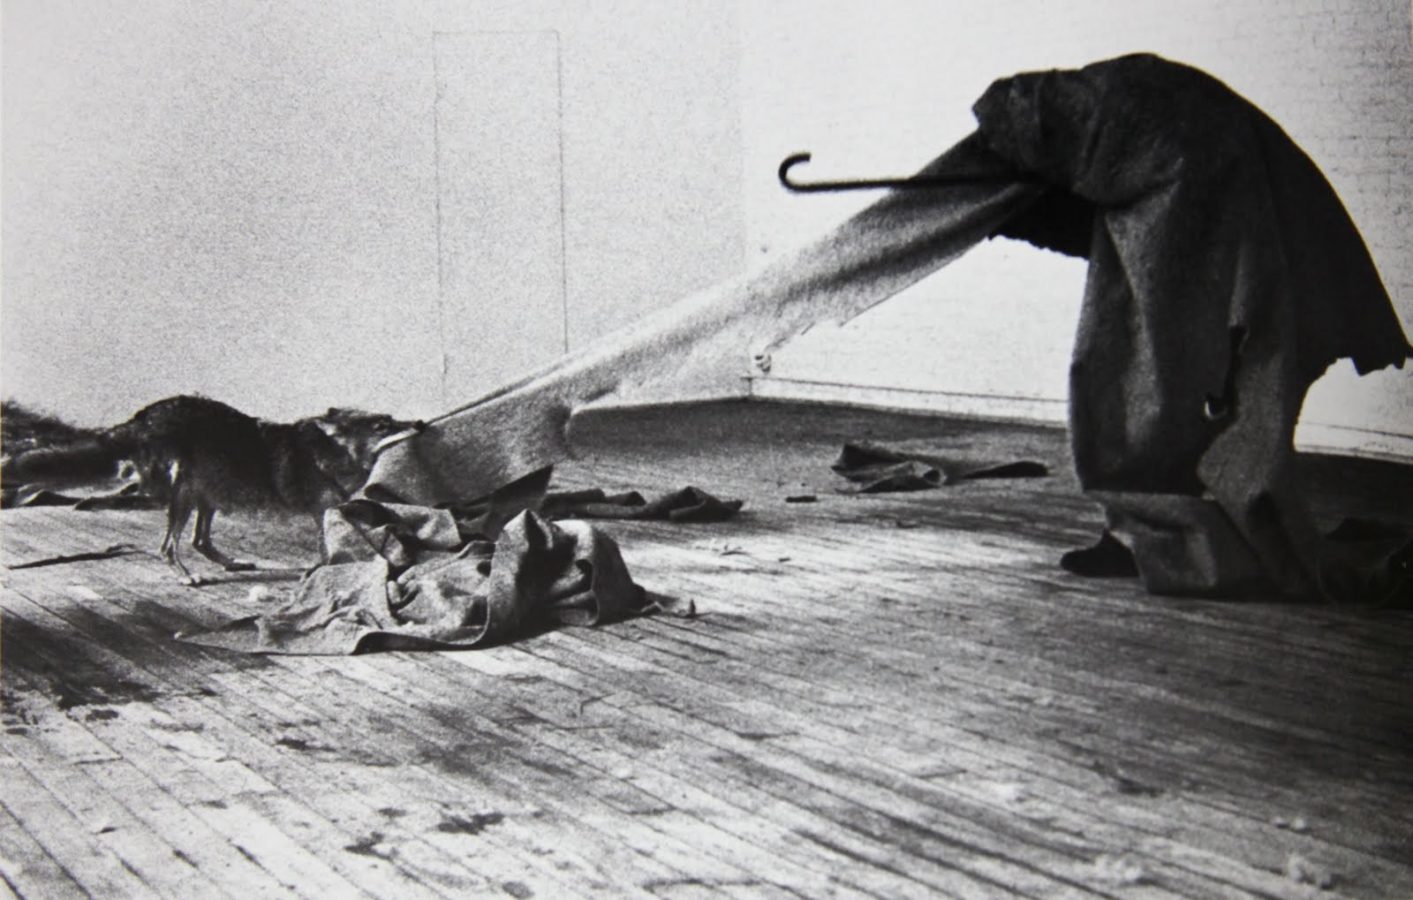 Joseph Beuys, I like America and America Likes Me, 1974, photo by Caroline Tisdall, most important works by joseph beuys